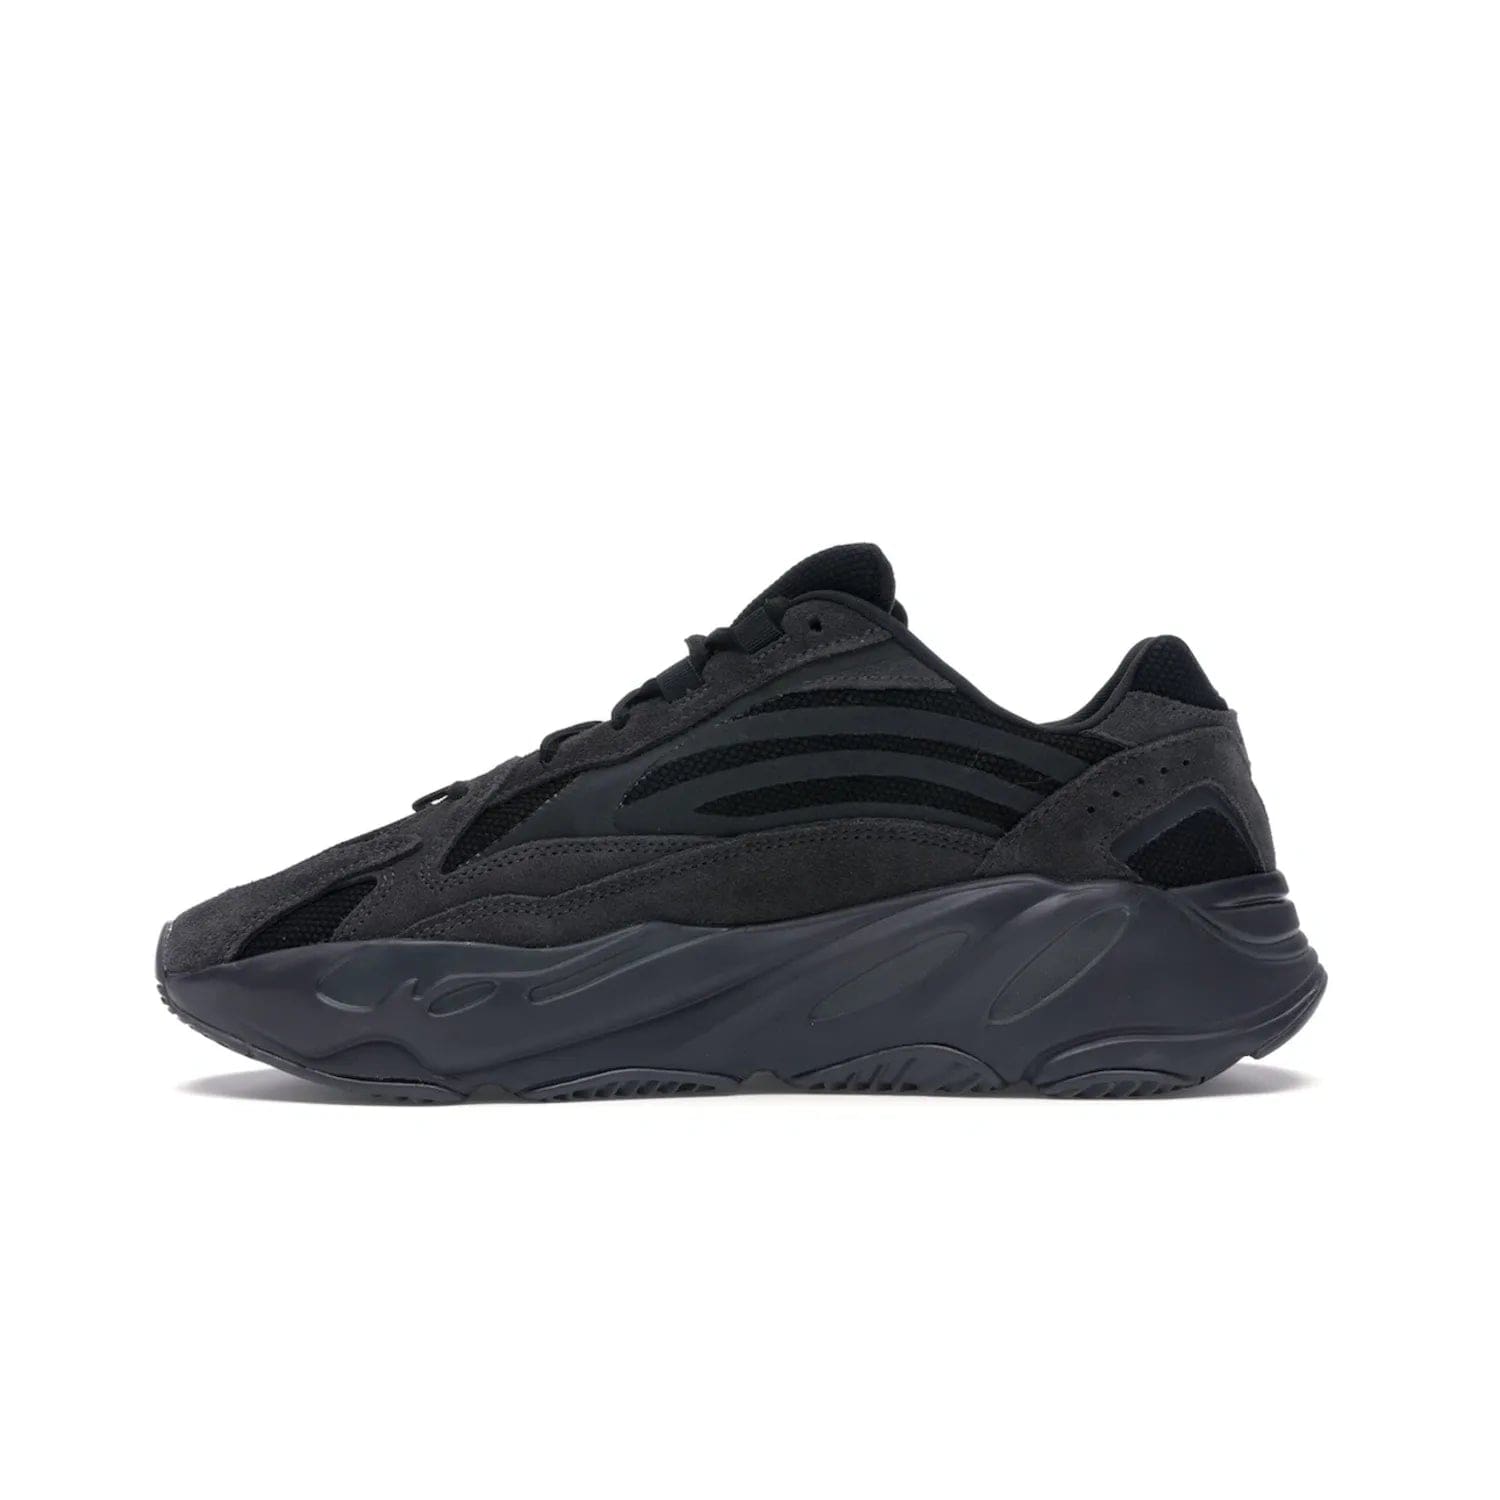 adidas Yeezy Boost 700 V2 Vanta - Image 19 - Only at www.BallersClubKickz.com - Introducing the adidas Yeezy Boost 700 V2 Vanta - a sleek and stylish all-black design featuring a combination of mesh, leather, and suede construction with signature Boost cushioning in the sole. The ultimate in comfort and support.